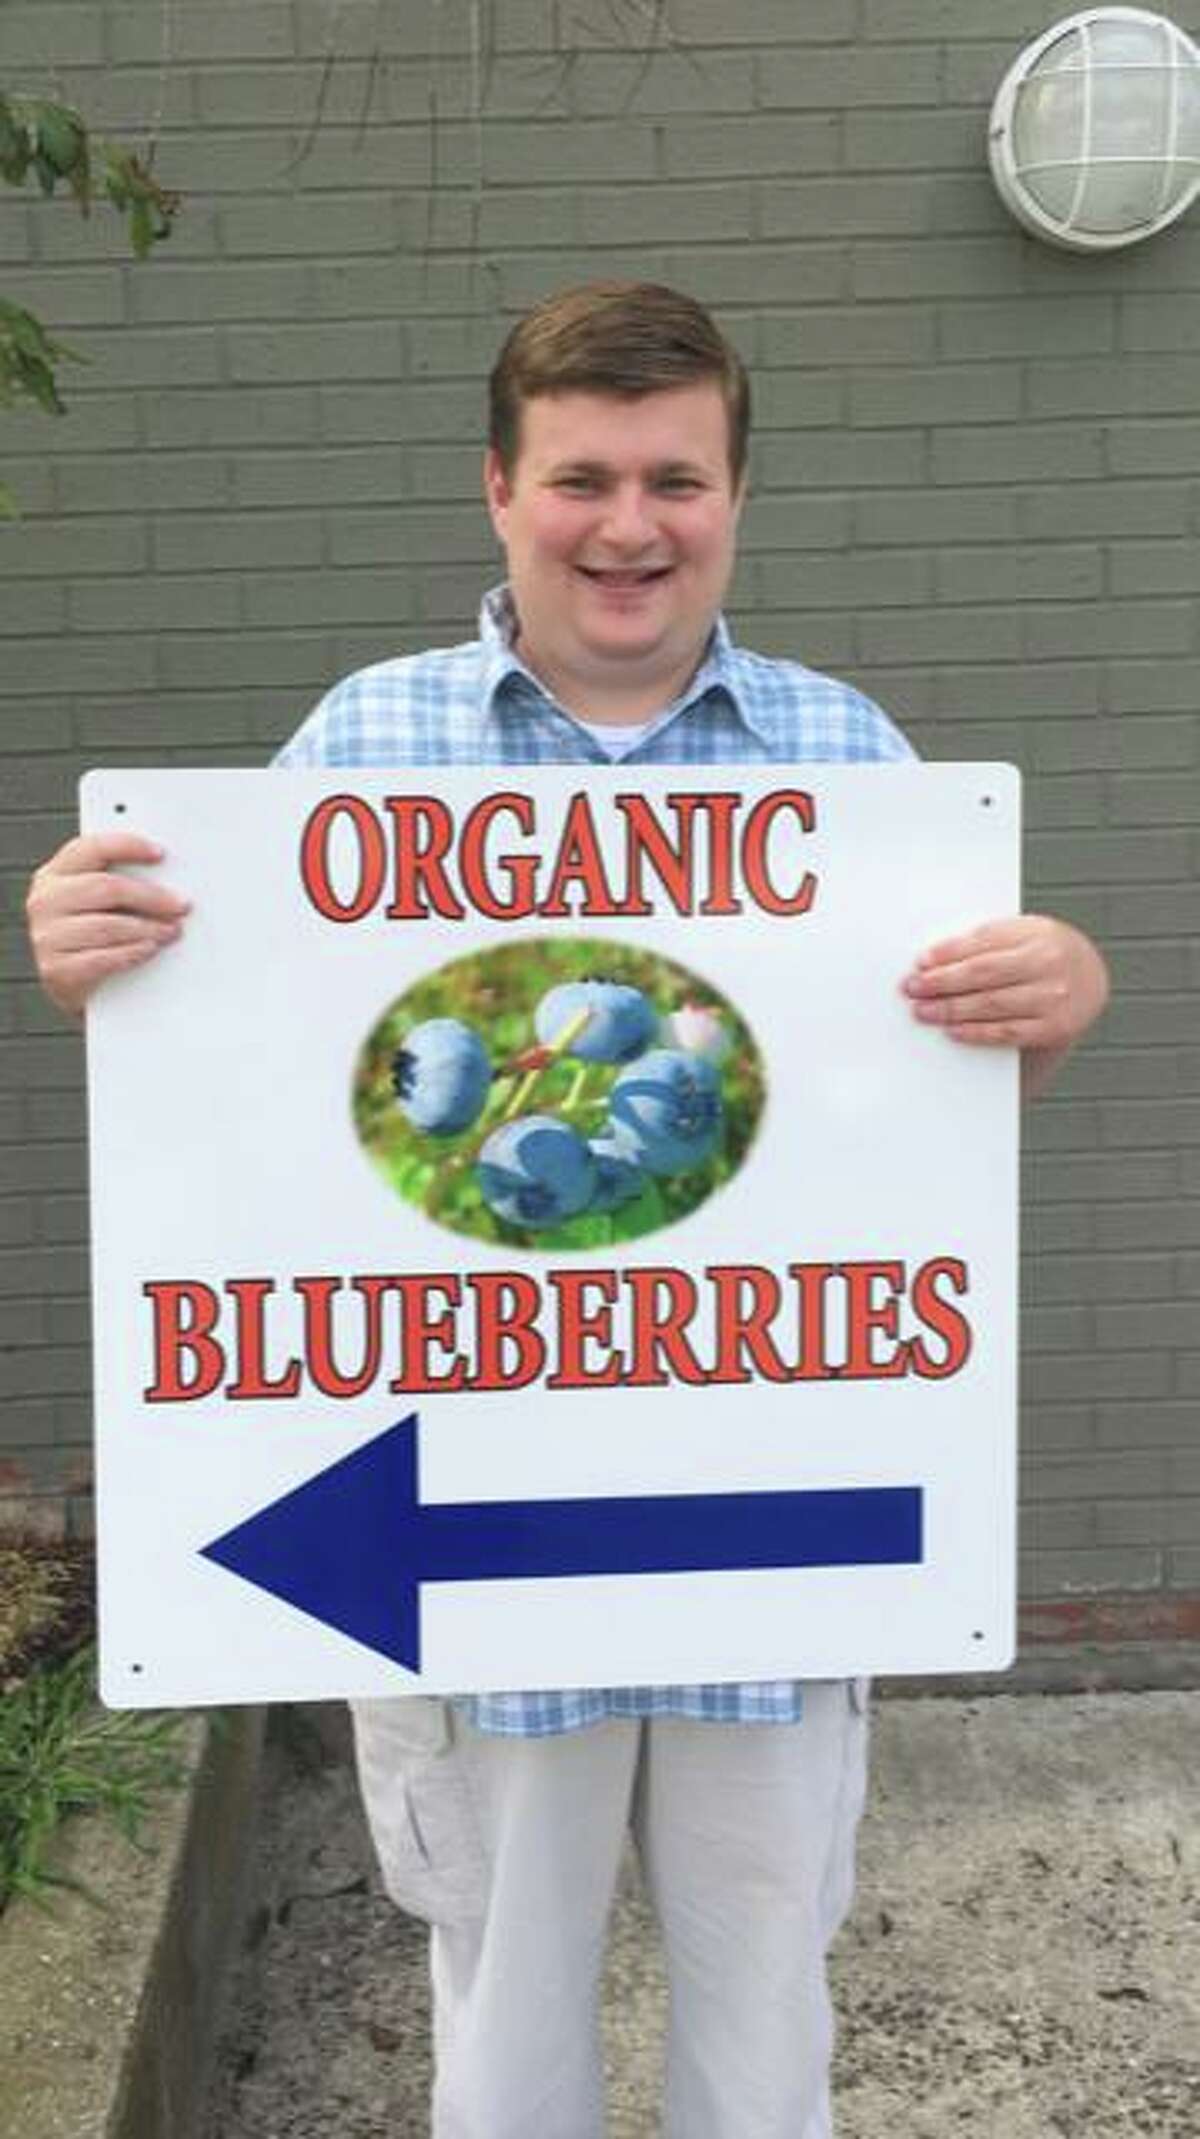 Graham Moore and others from Greenwich-based Abilis are selling organic blueberries around town as part of the Grahamberries program, a unique partnership with an organic blueberry farm in upstate New York.